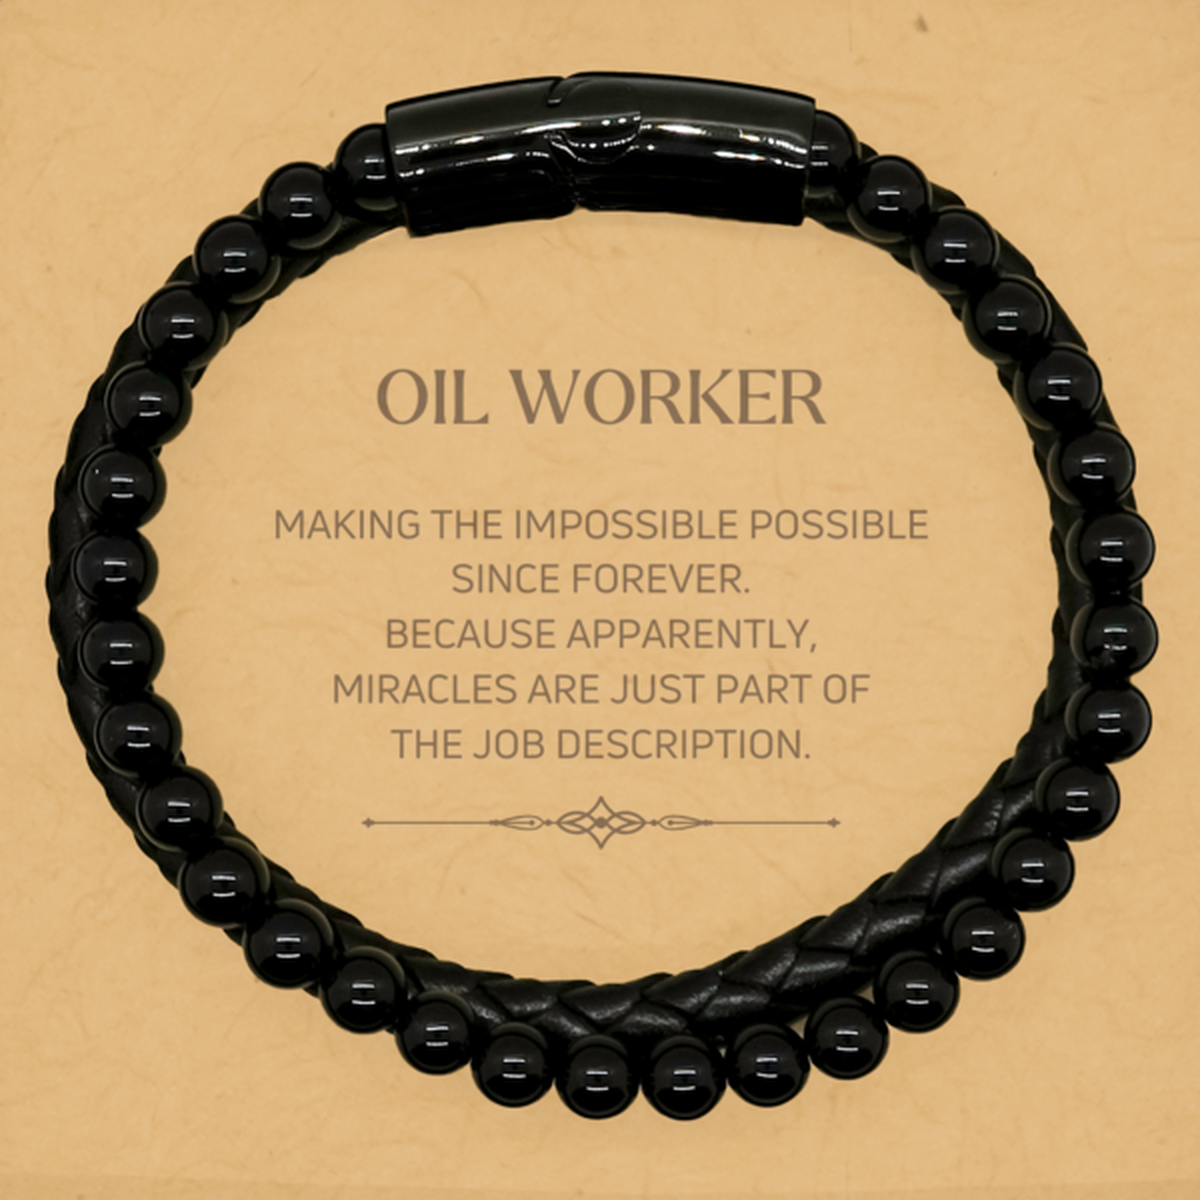 Funny Oil Worker Gifts, Miracles are just part of the job description, Inspirational Birthday Stone Leather Bracelets For Oil Worker, Men, Women, Coworkers, Friends, Boss